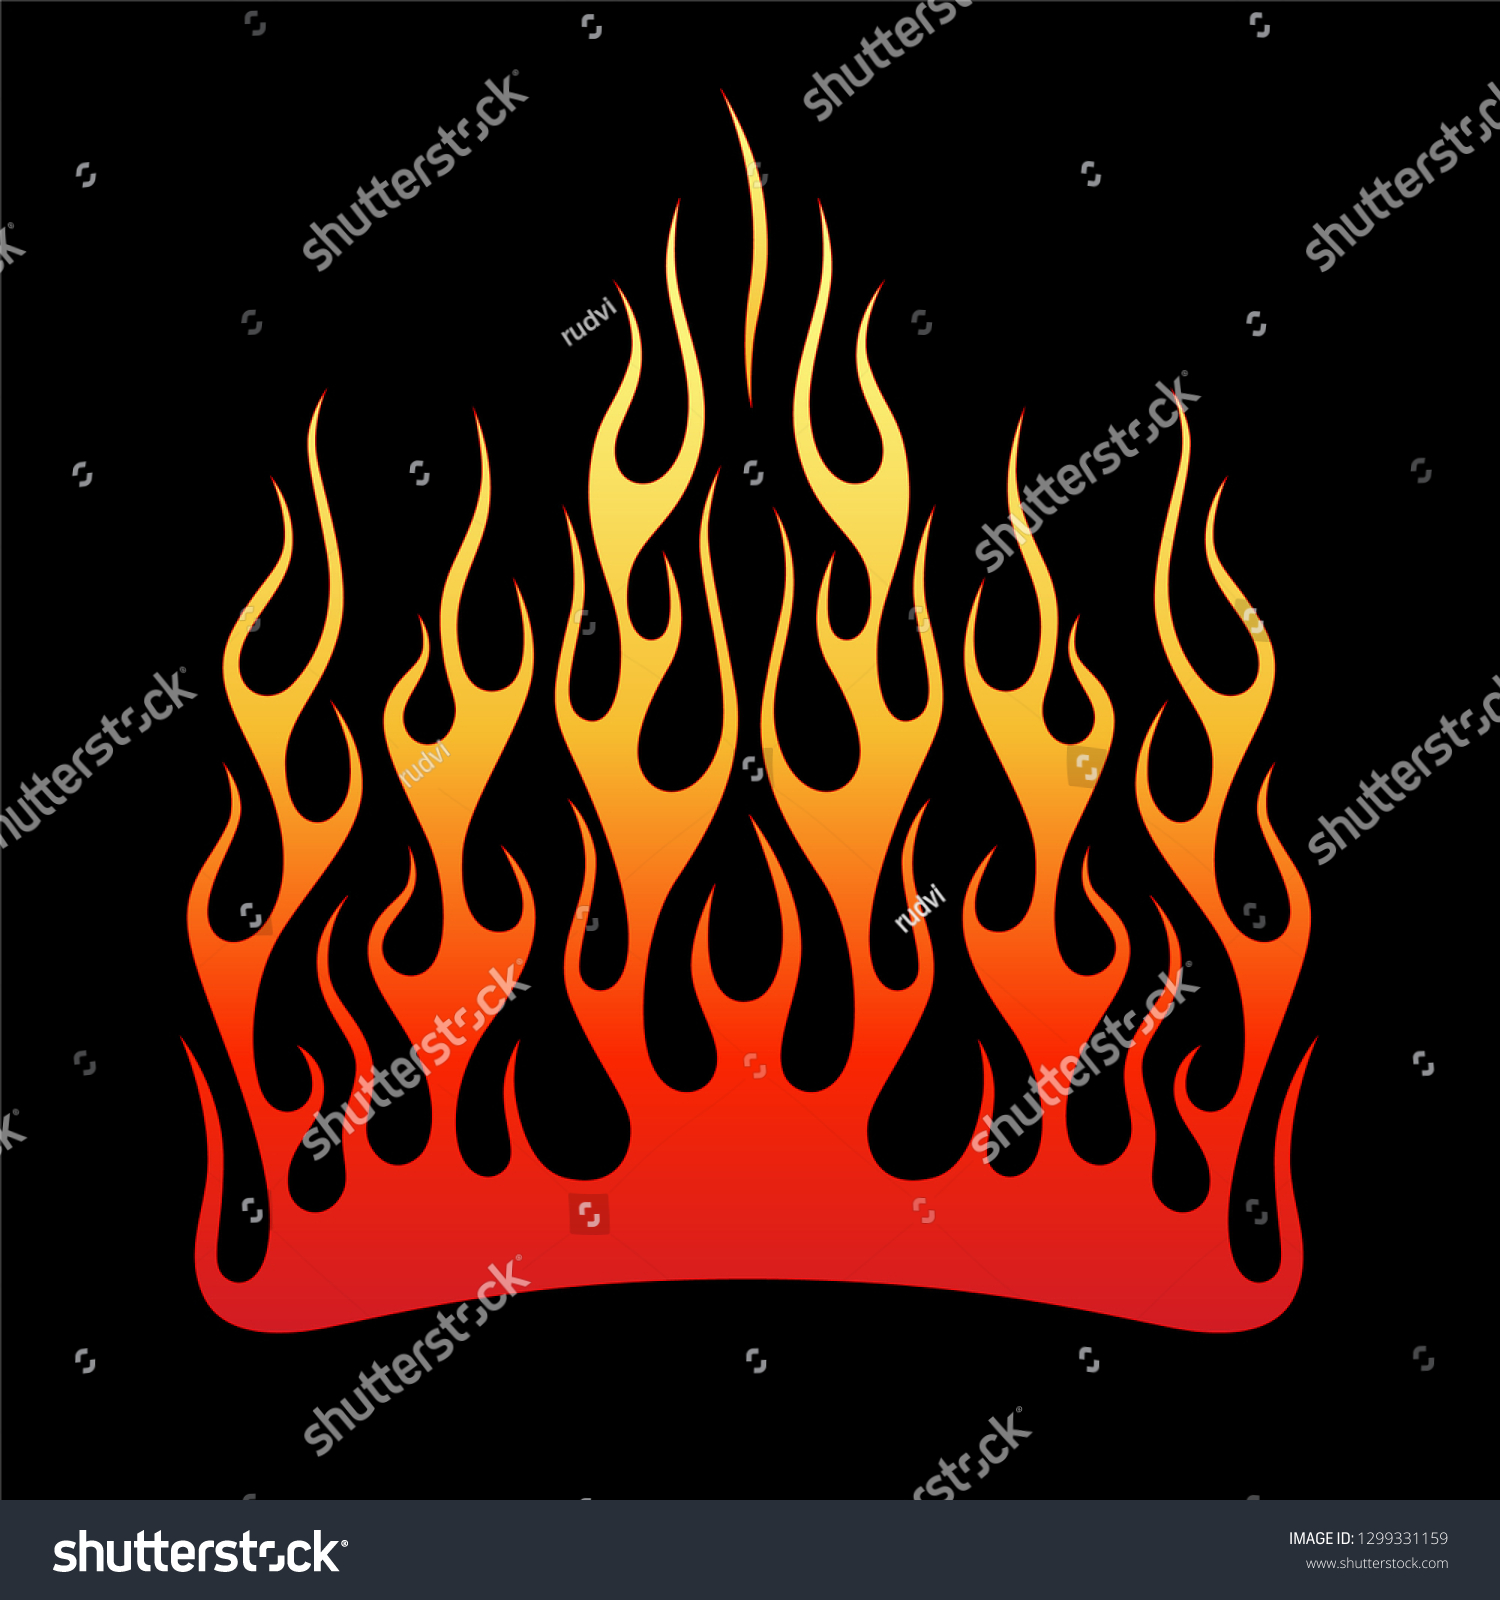 Flame Vector Fire Pattern Illustration Car Stock Vector (Royalty Free